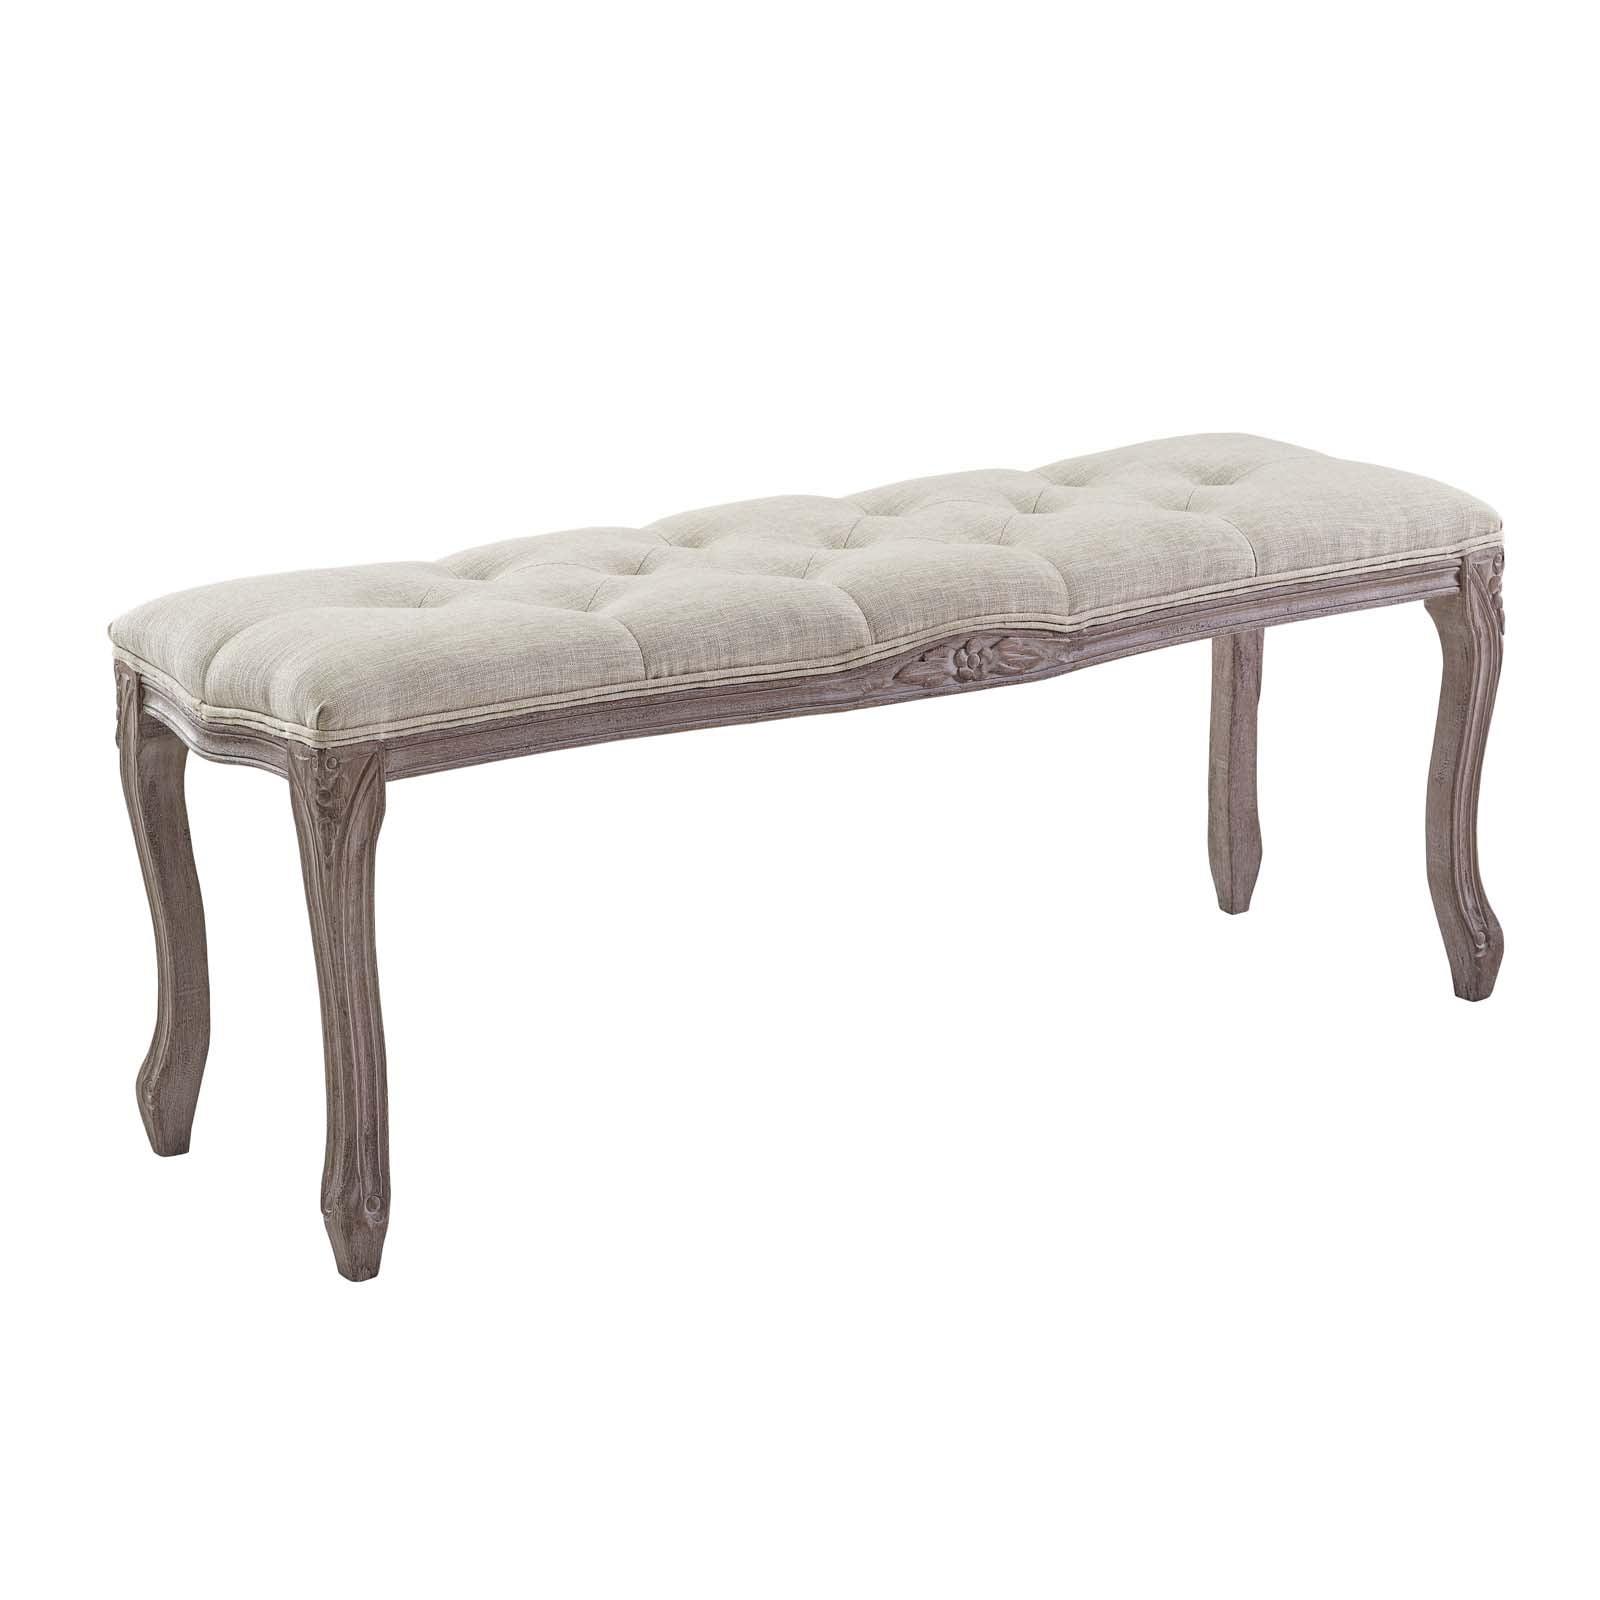 Vintage French Elegance Cream Tufted Bench with Gray Wood Legs